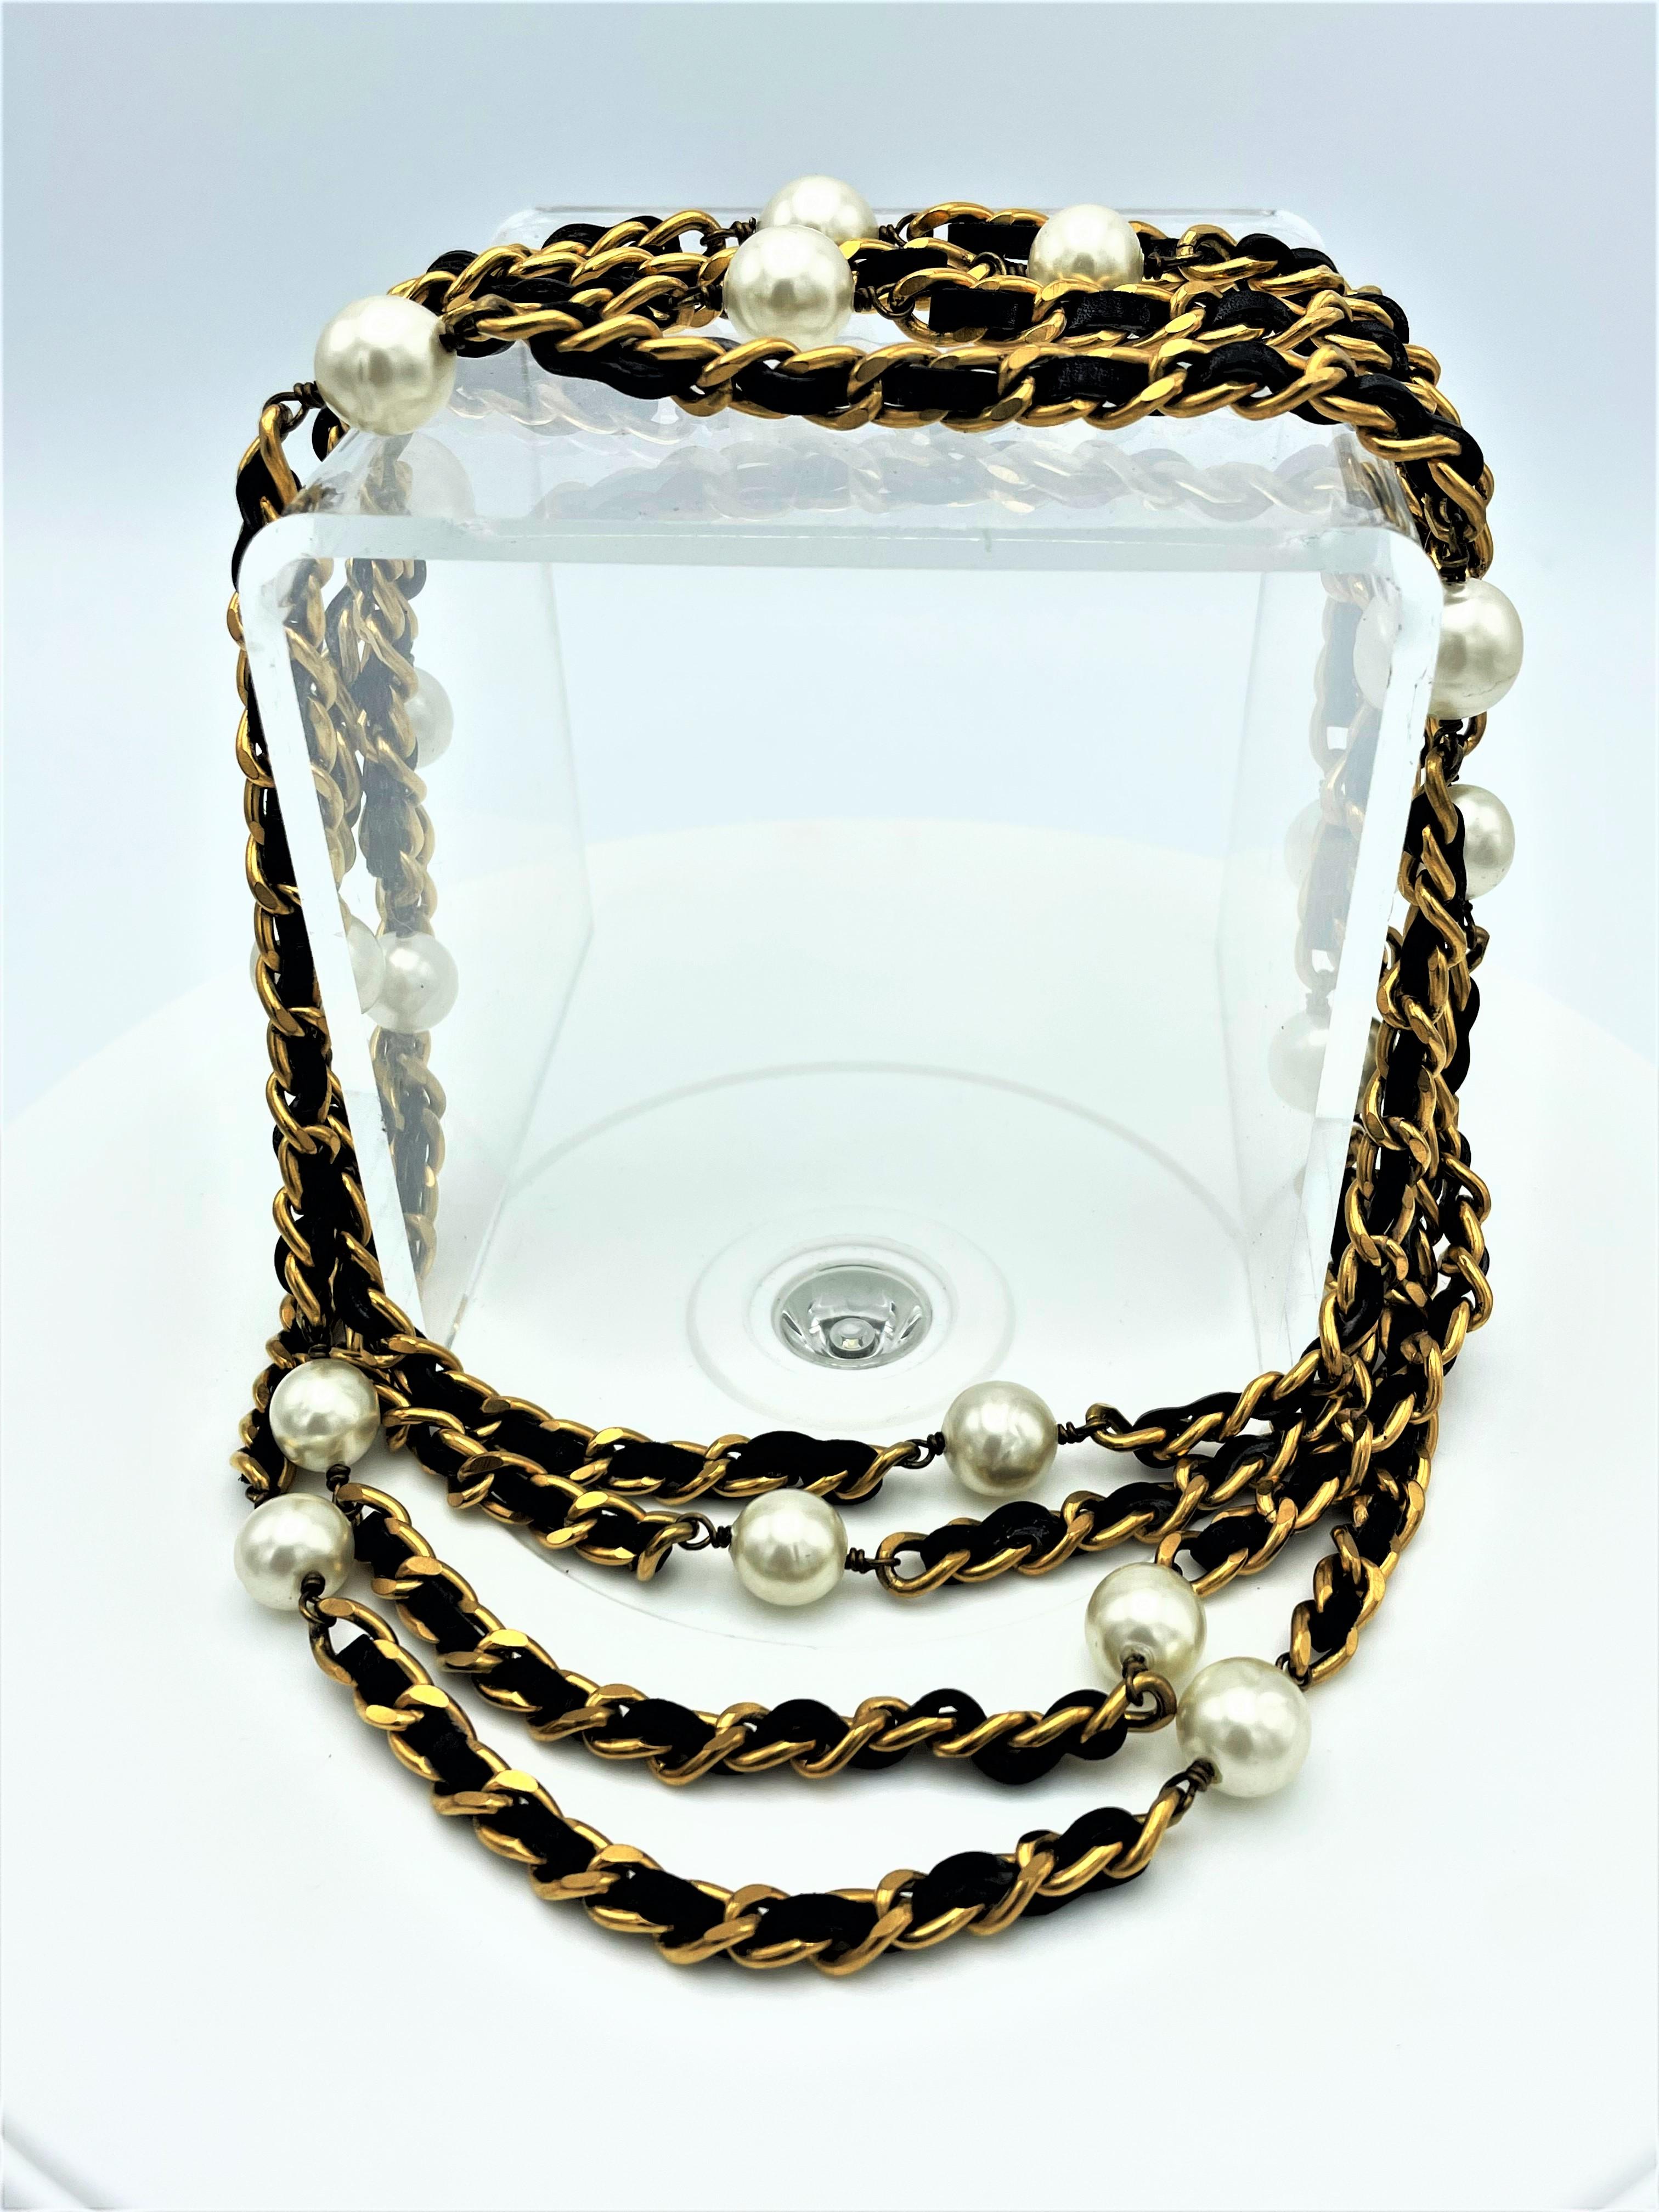 Women's Iconic Chanel chain with leather woven throughout and Chanel pearls, 1990s